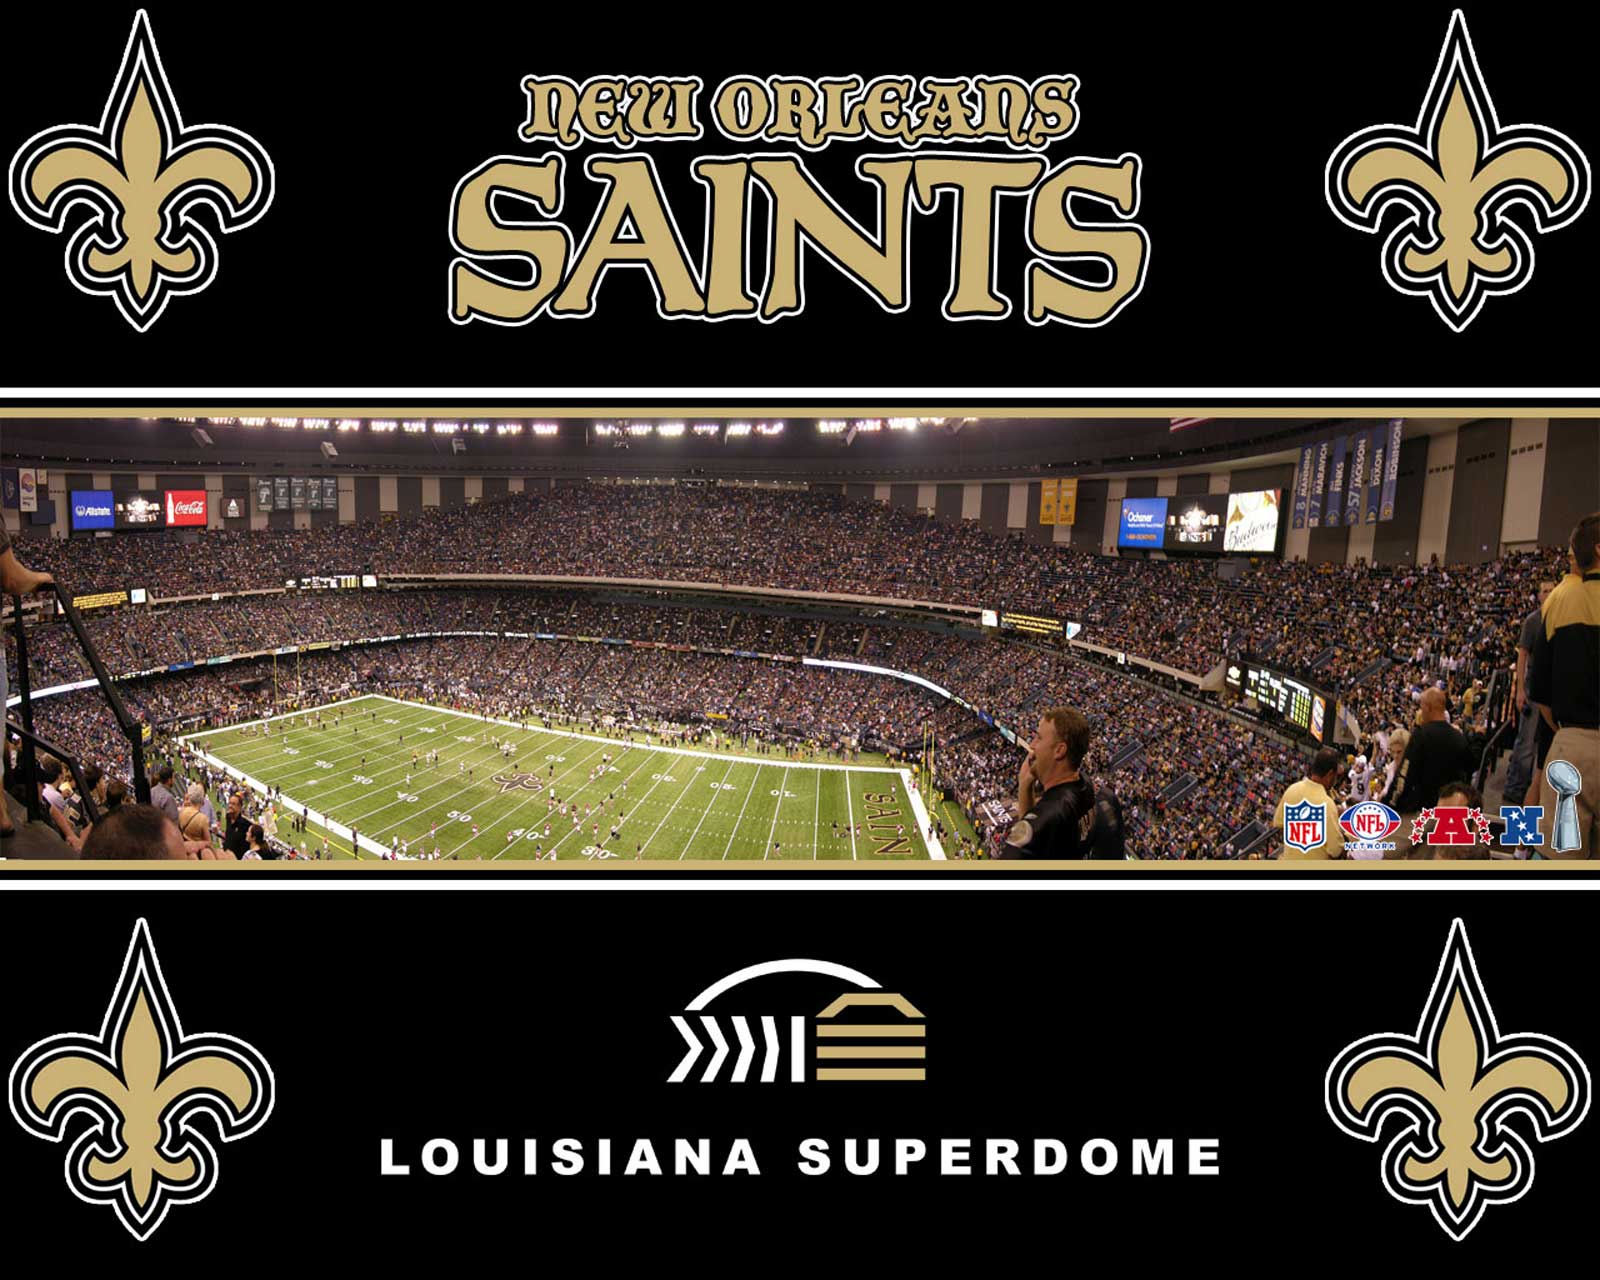 New Orleans Saints wallpapers HD image